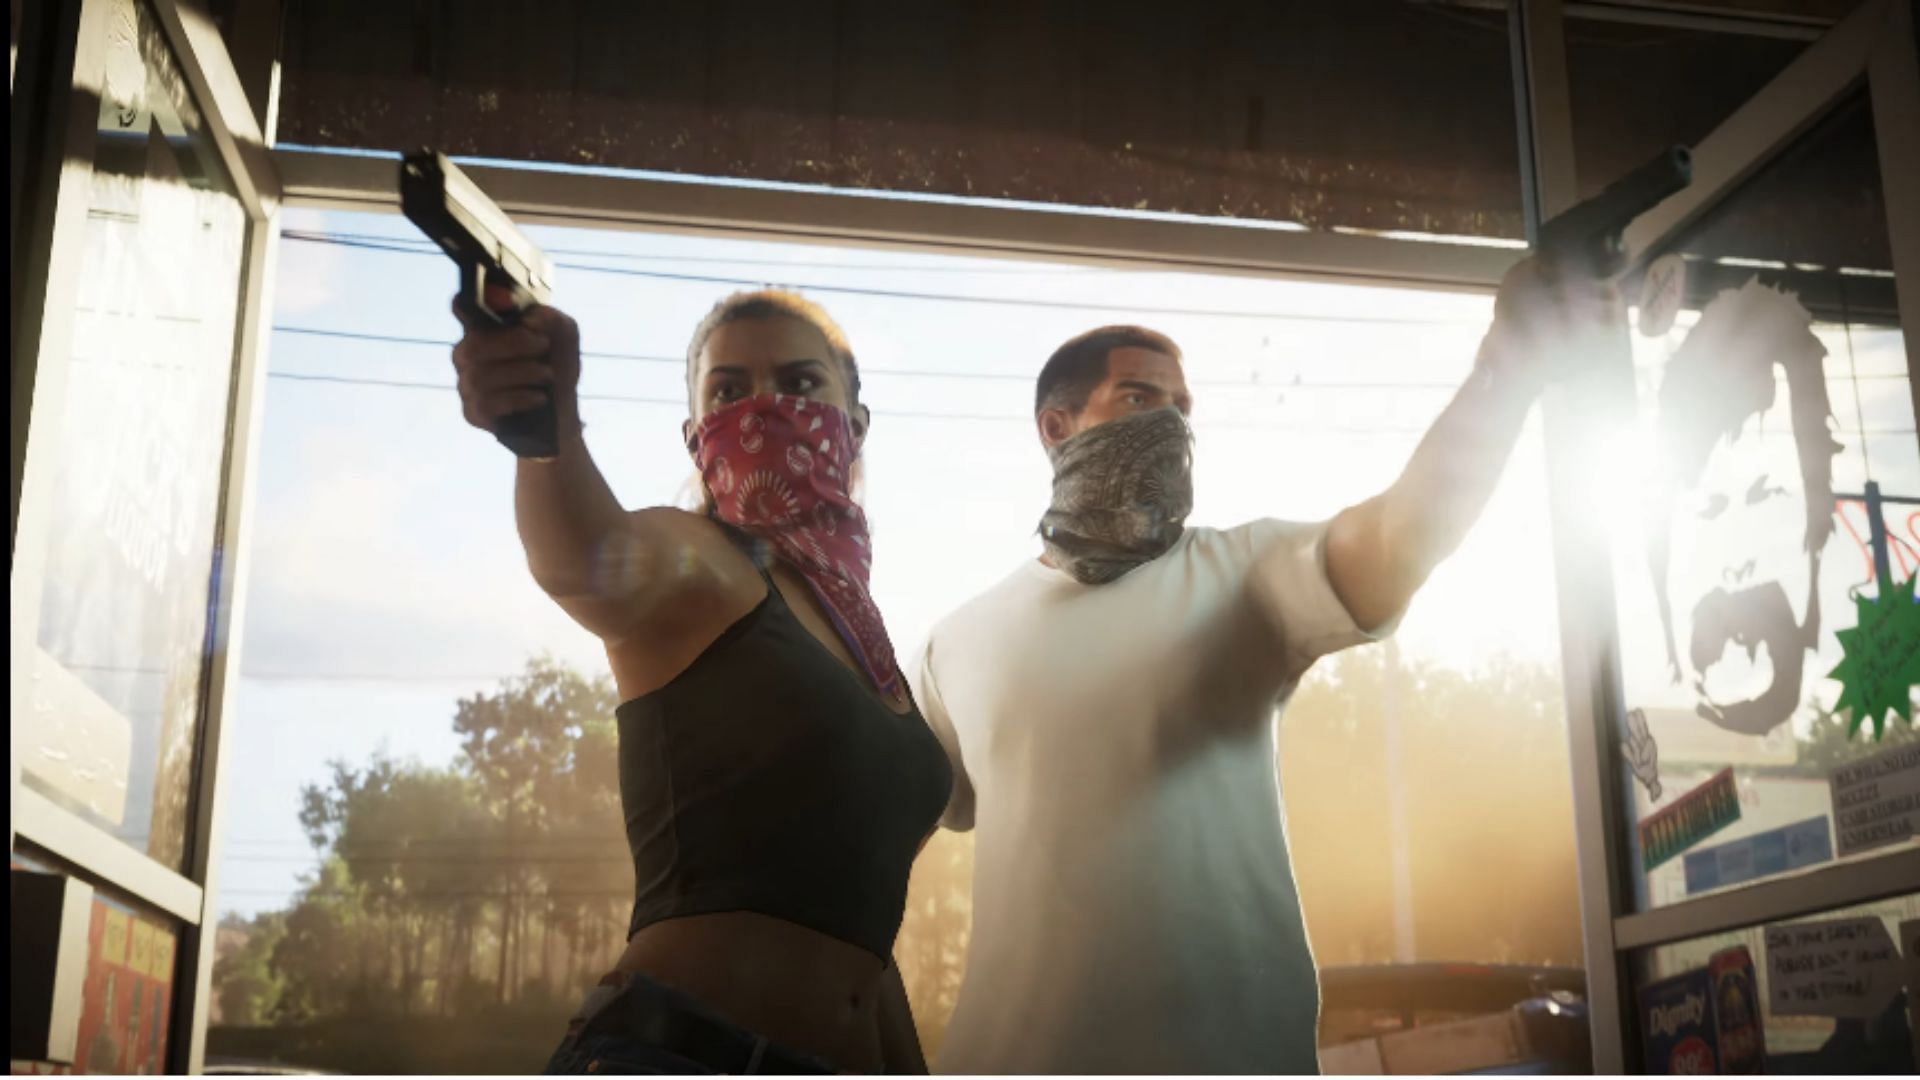 Fans are eager to see more of Lucia and her partner (Image via Rockstar Games)